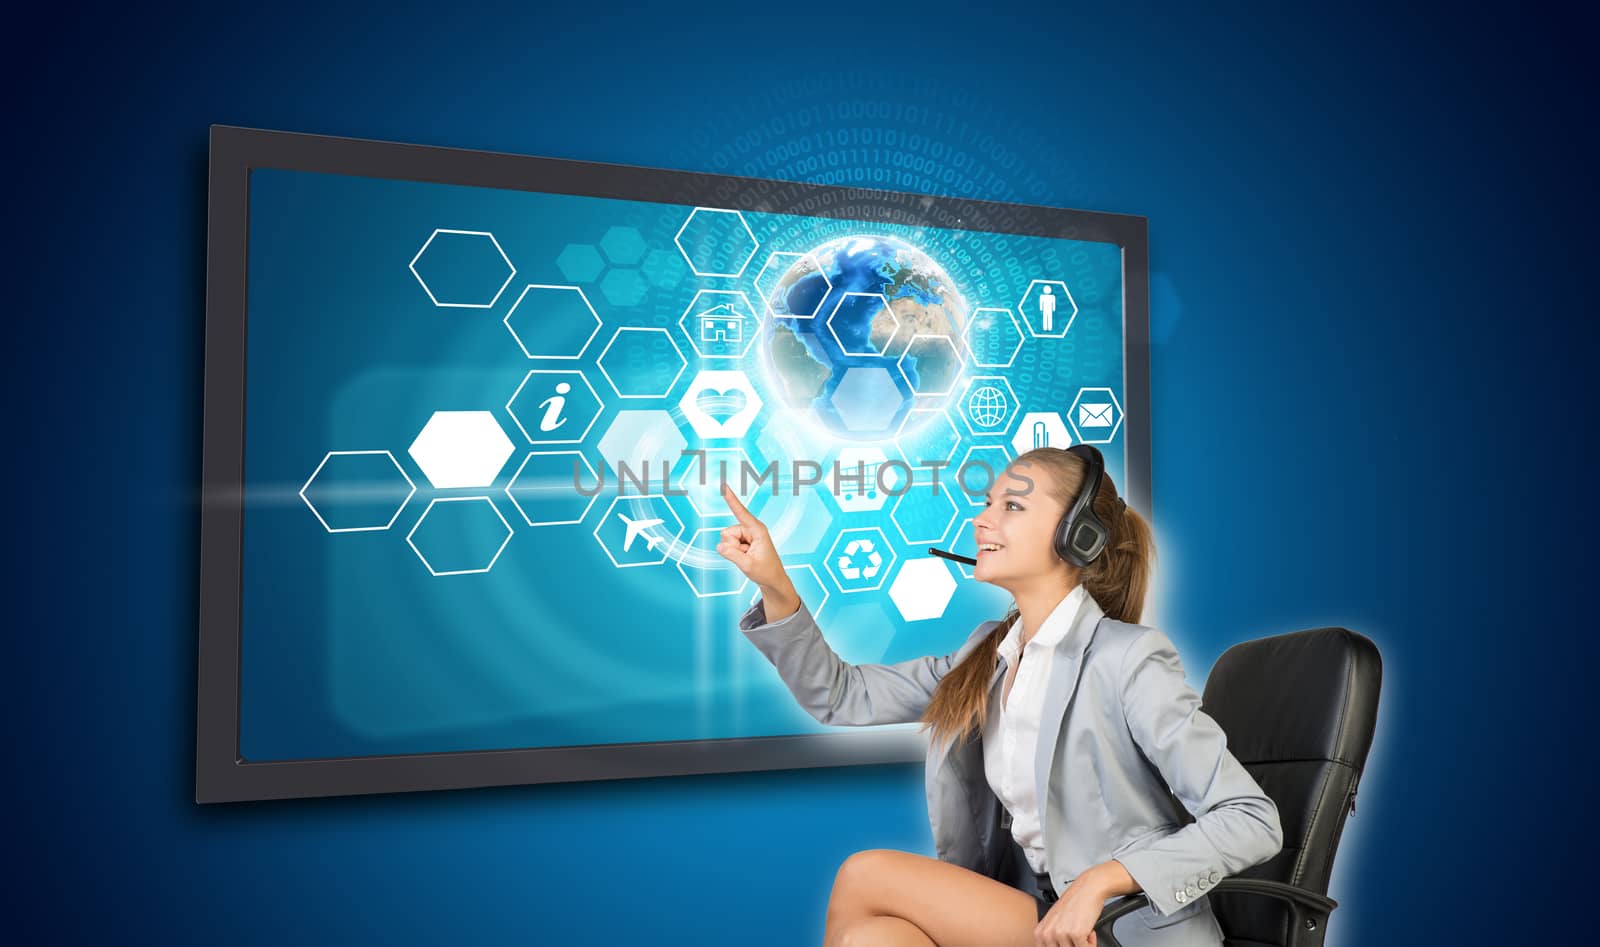 Businesswoman in headset pressing touch screen button on virtual interface with honeycomb shaped icons and Globe with radiant figures, on blue background. Element of this image furnished by NASA